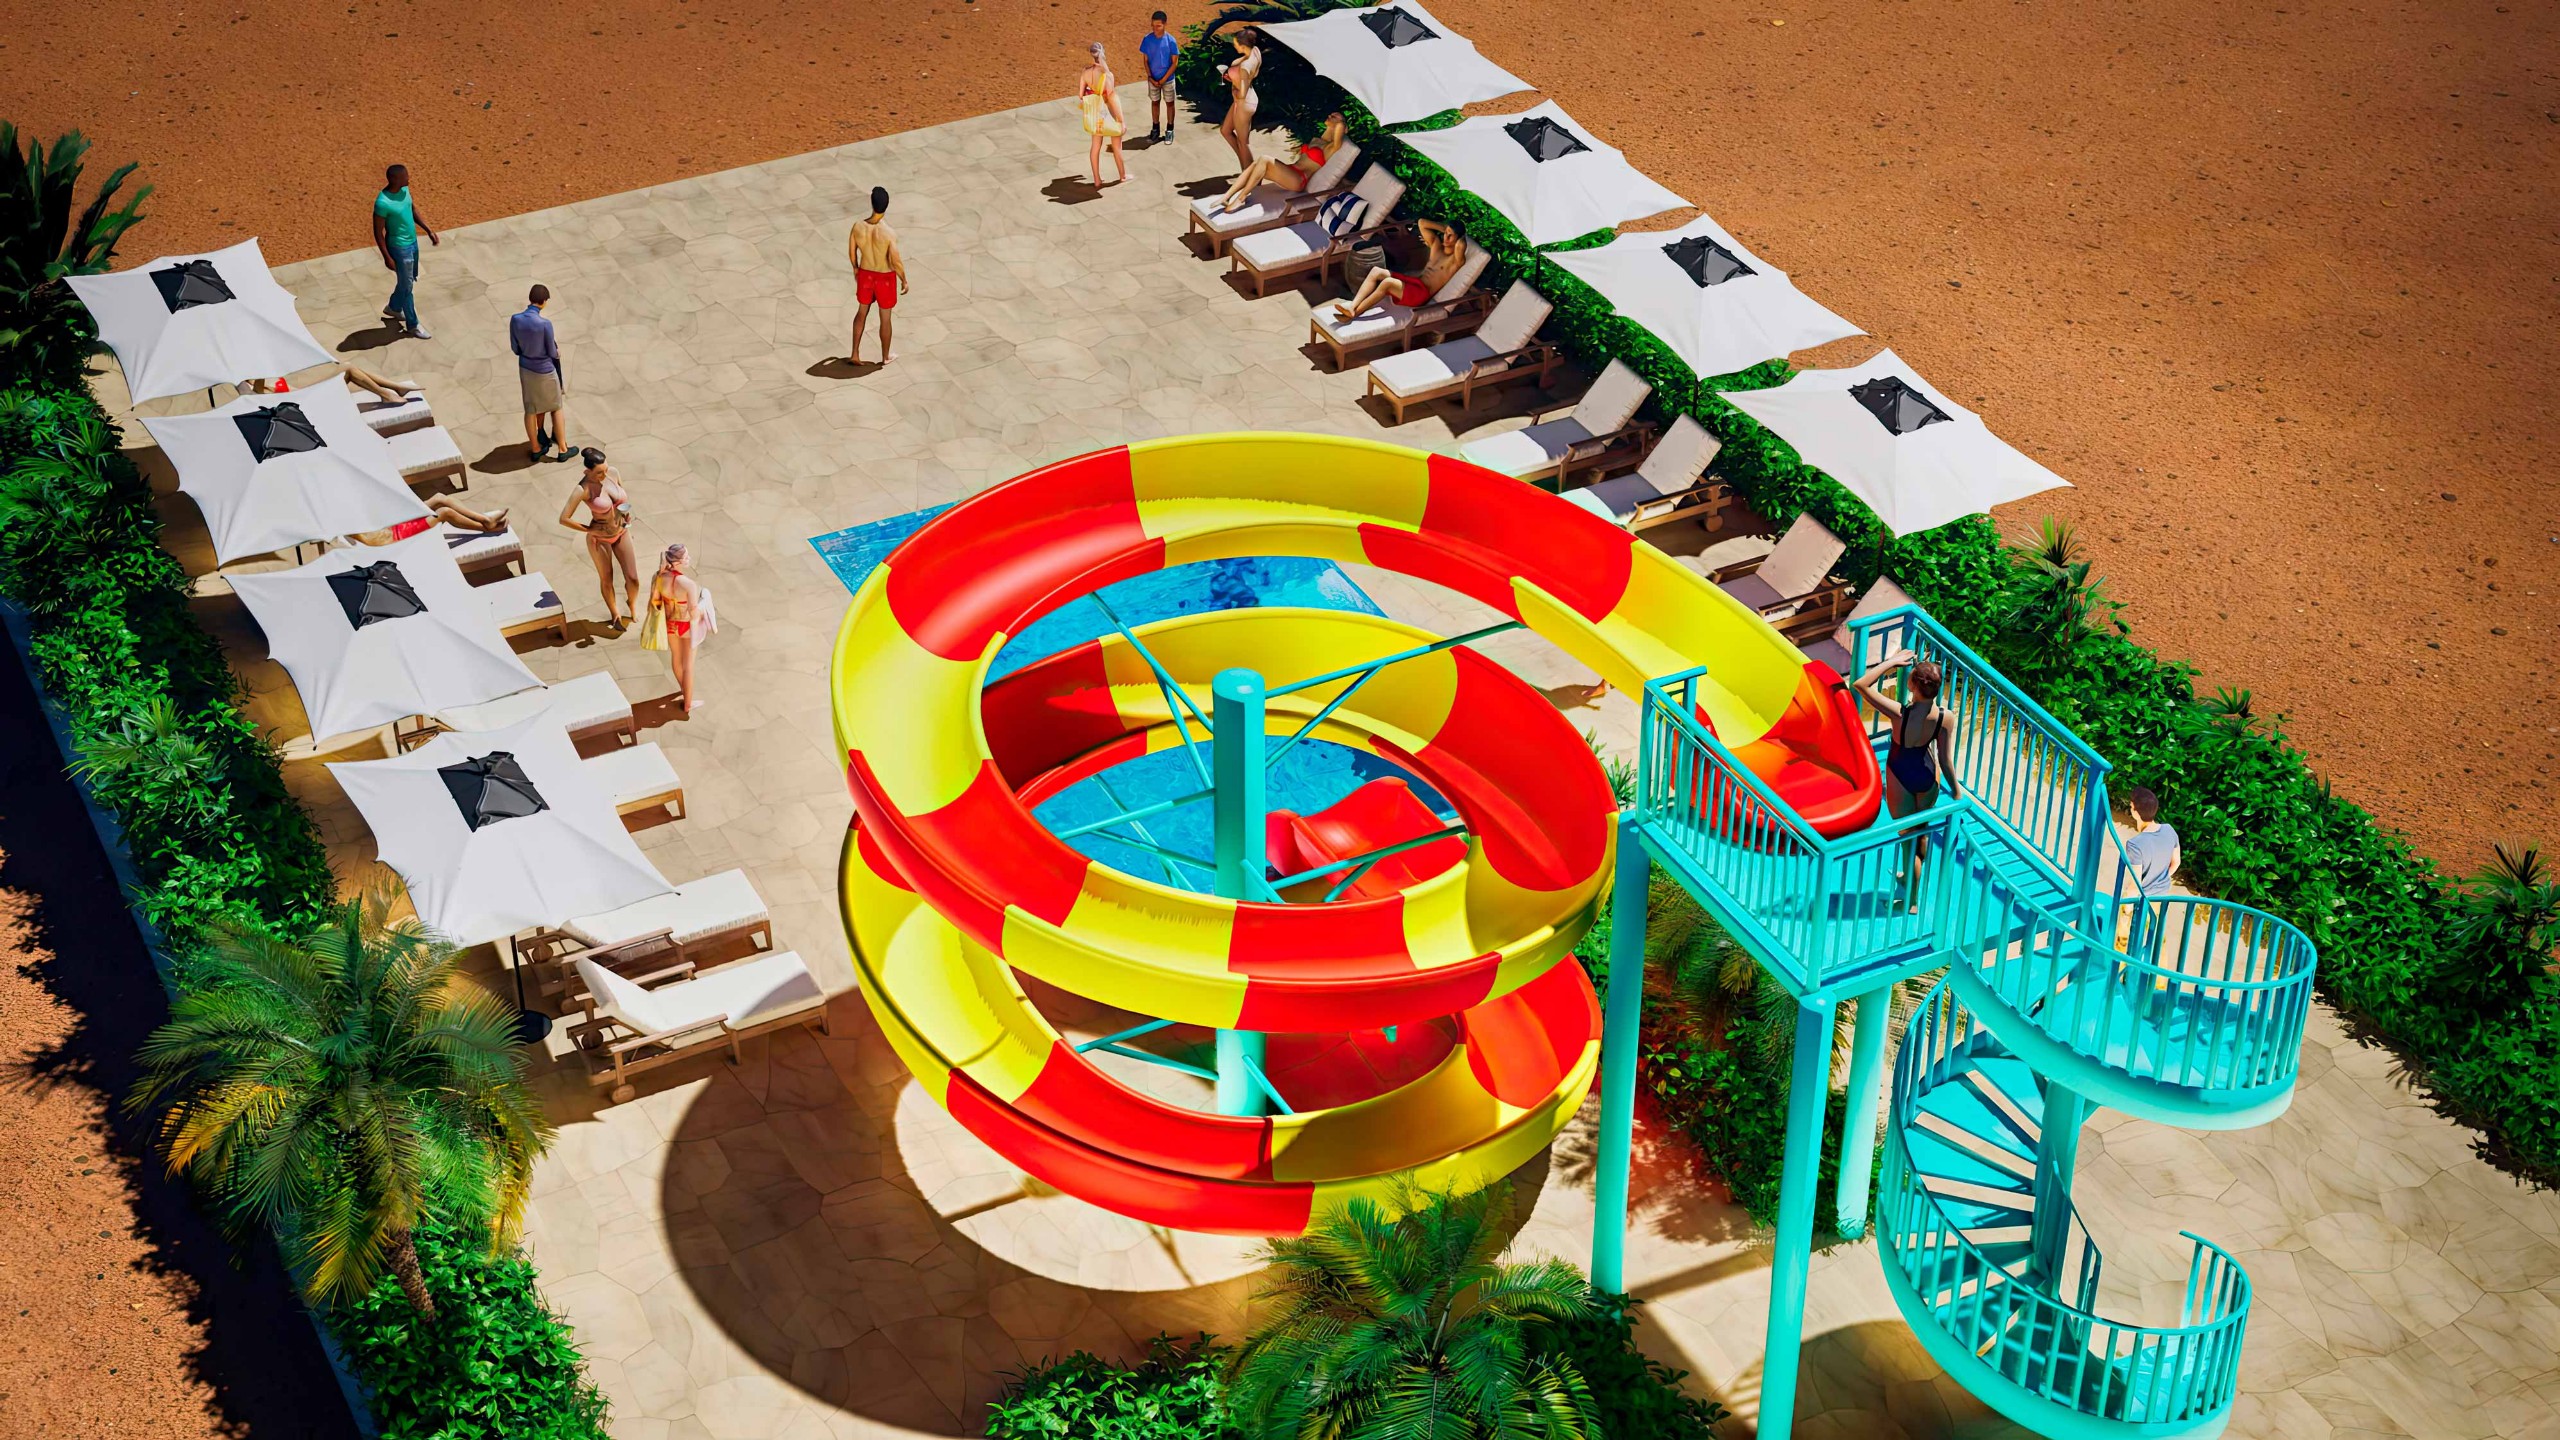 WATER PARK SLIDES COMPANY EUROPE